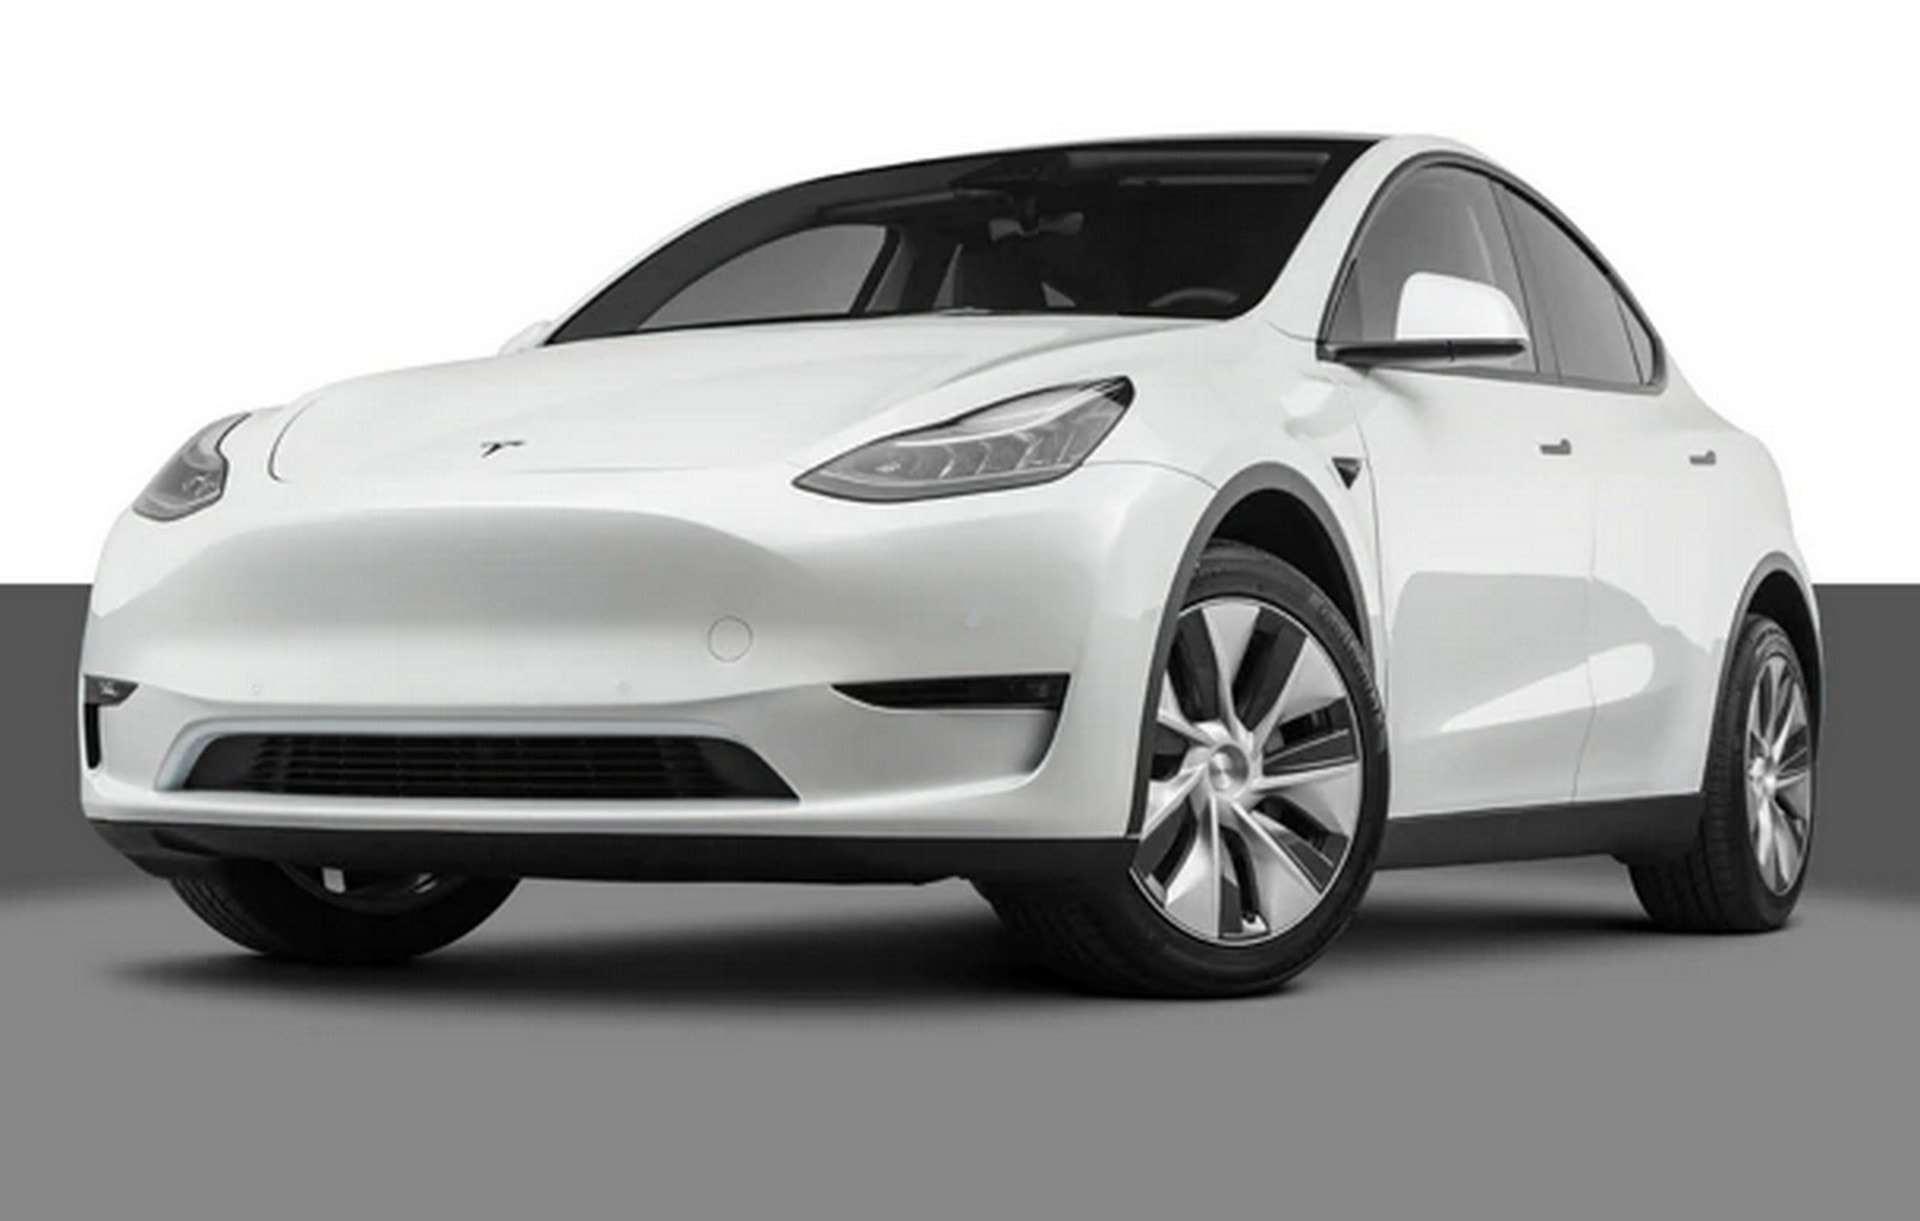 Tesla Model Y With 4680 Battery for Sale on Company Site but There Is a